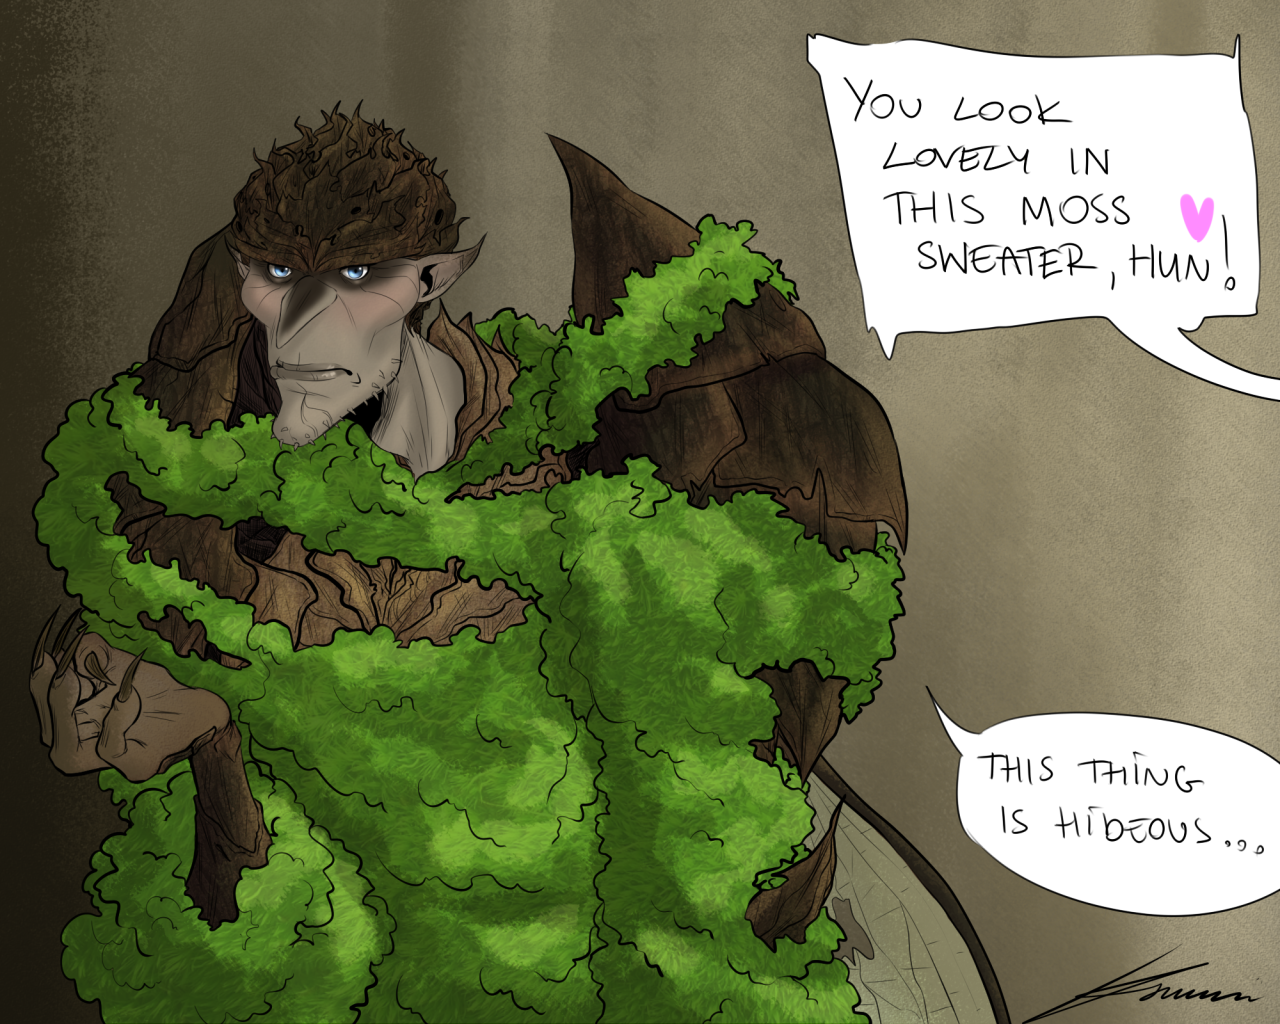   I’d rather say he looks MOSSY! This took me a month to do, lol, not rly, I hadn’t